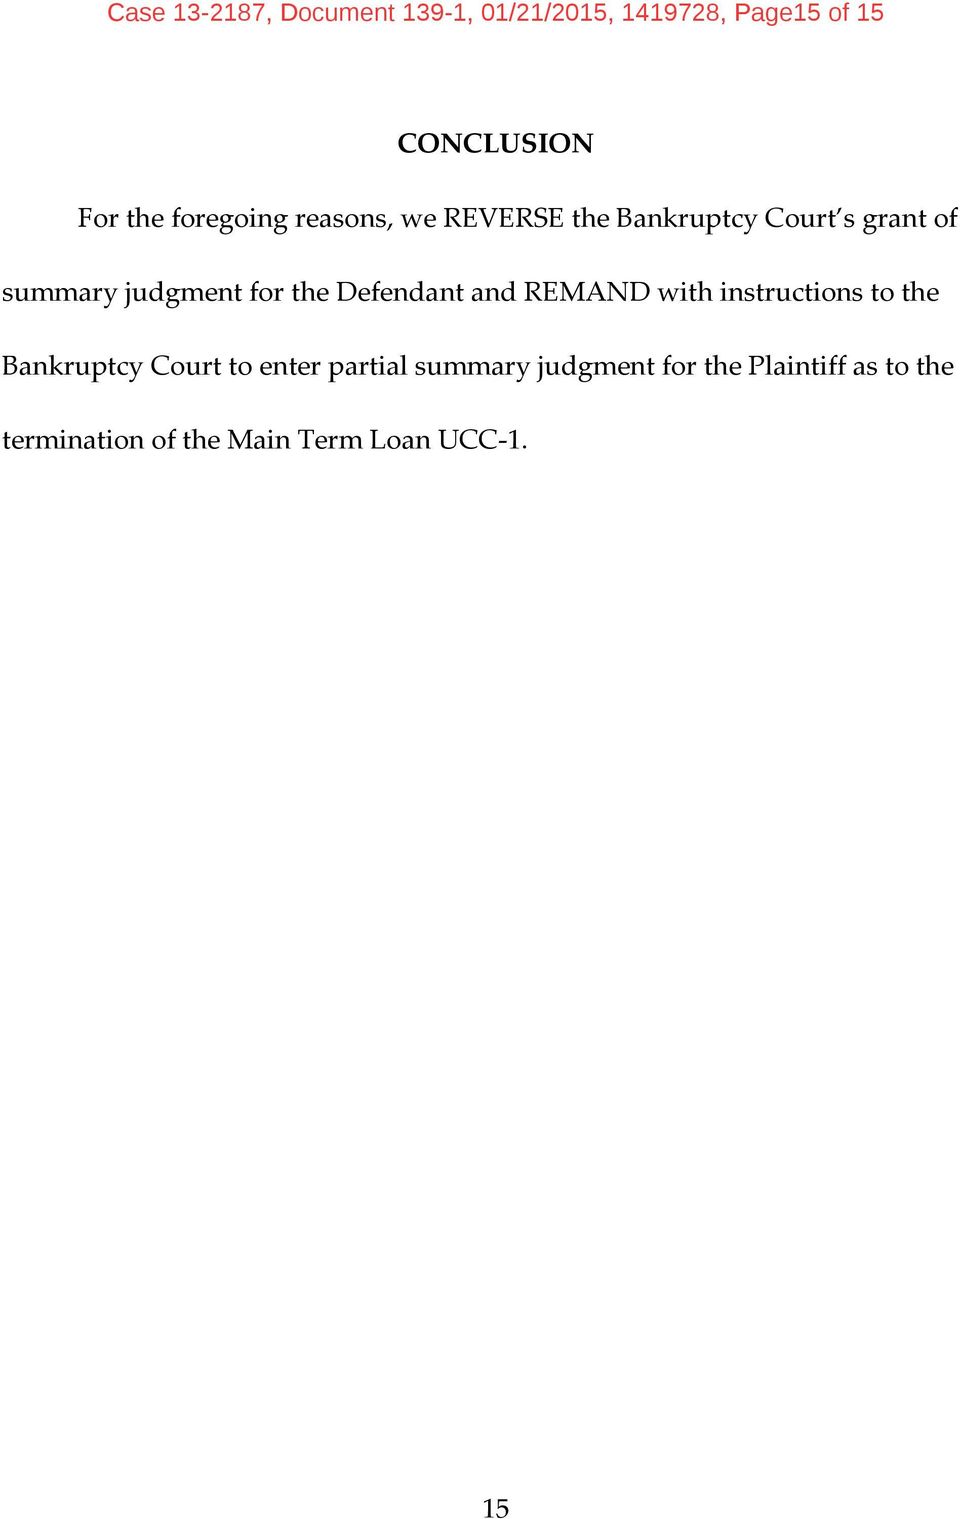 the Defendant and REMAND with instructions to the Bankruptcy Court to enter partial